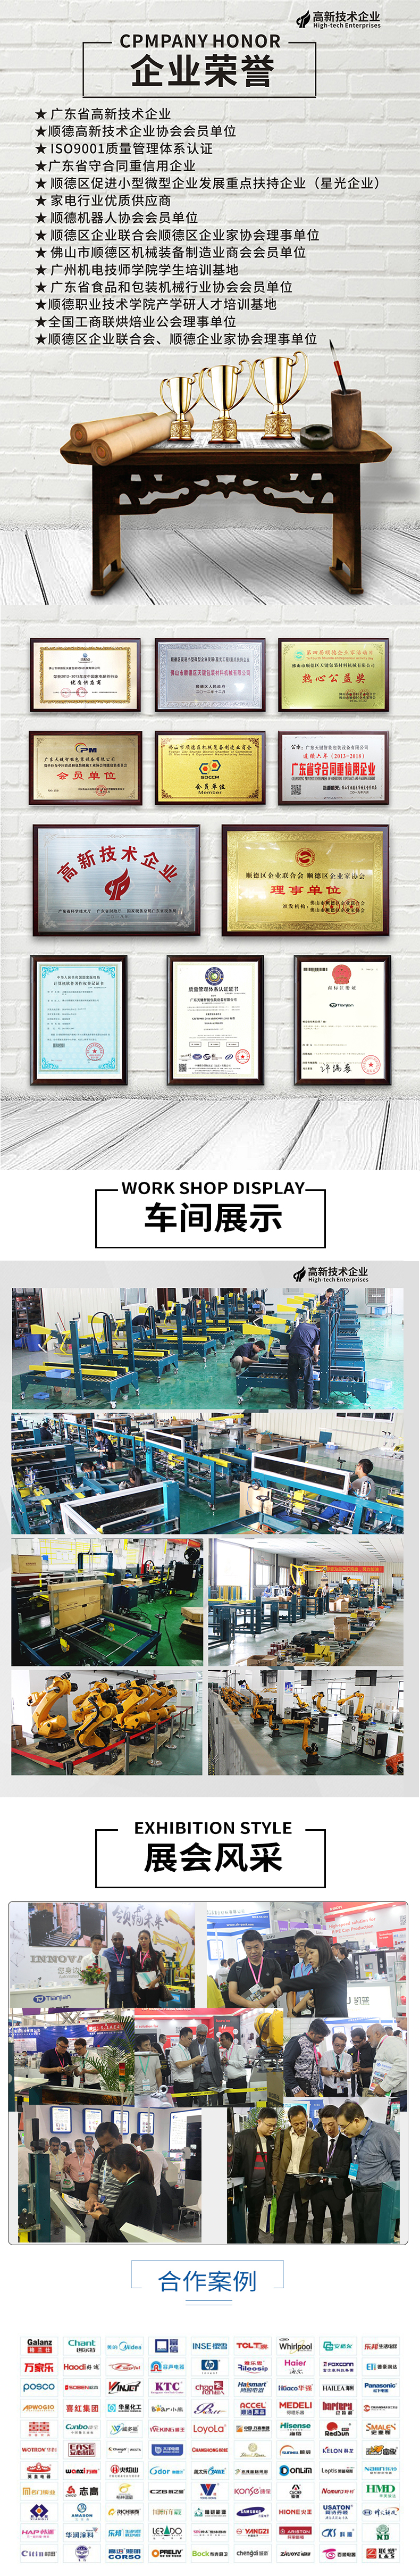 Carton automatic opening and sealing machine, all-in-one machine, sky key, fully self-service sealing, bundling and packaging machine